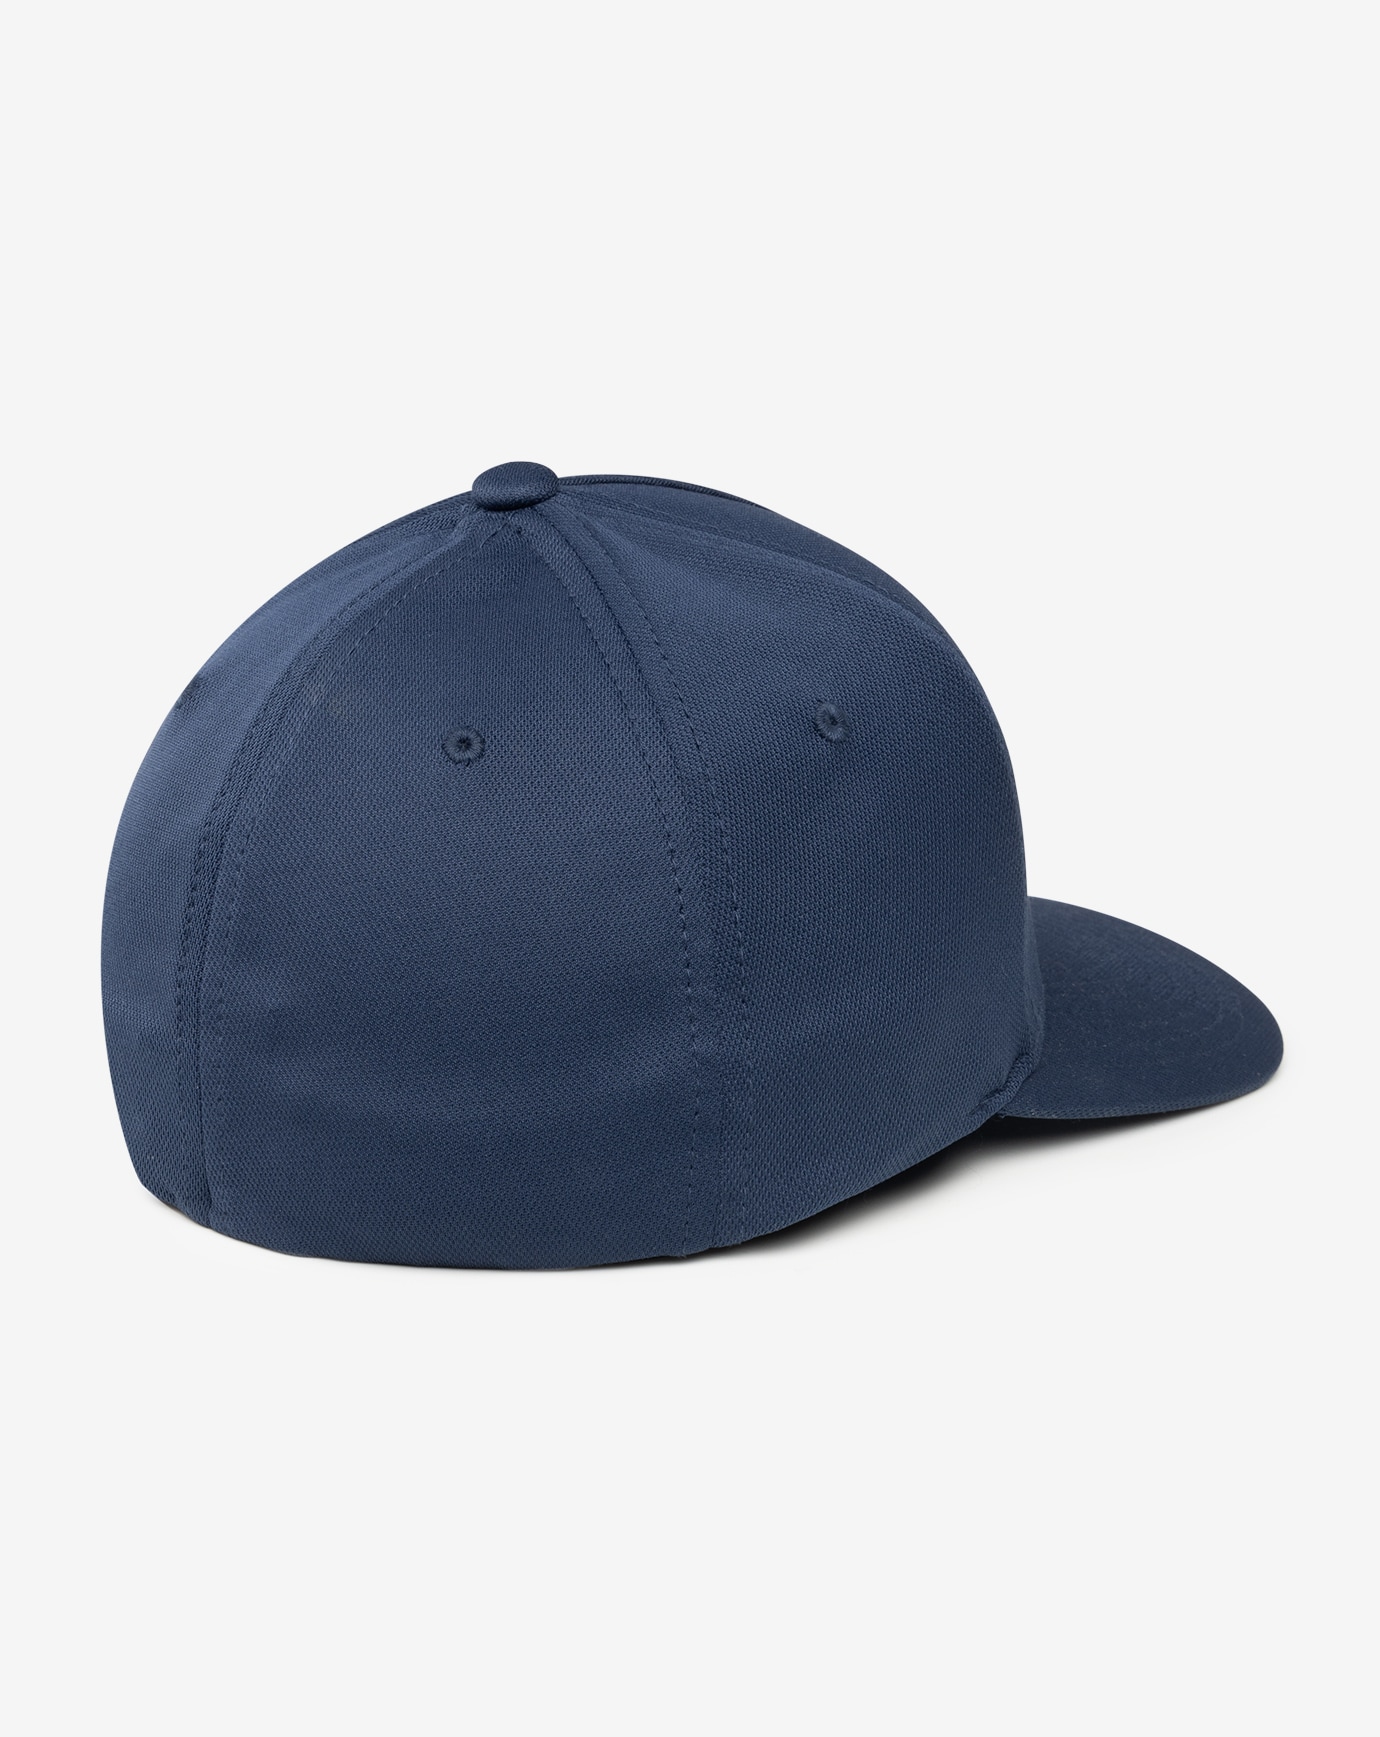 ECHO PARK FITTED HAT Image Thumbnail 3